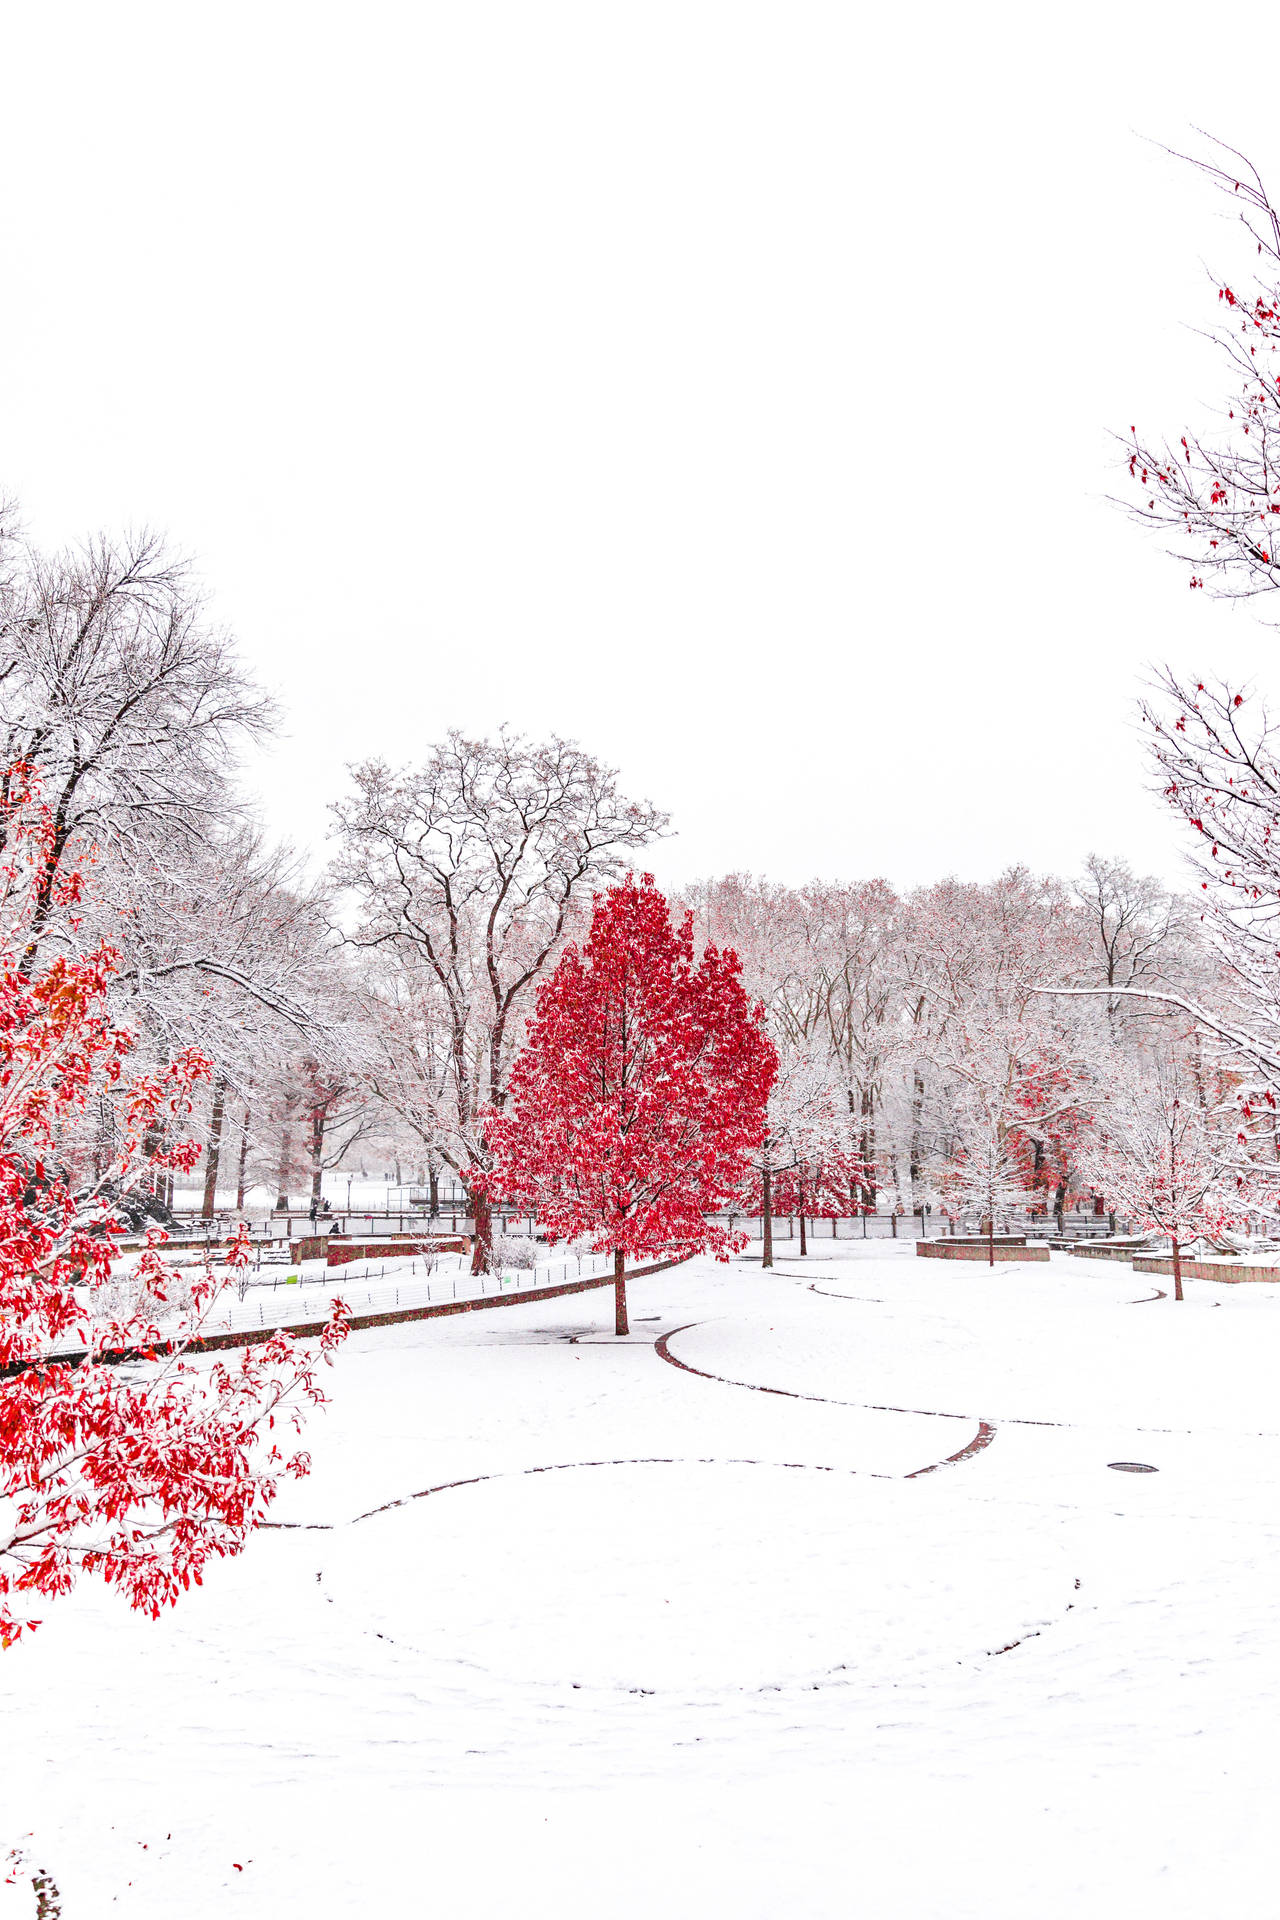 50 Winter Backgrounds You Can Download Free - Mashtrelo